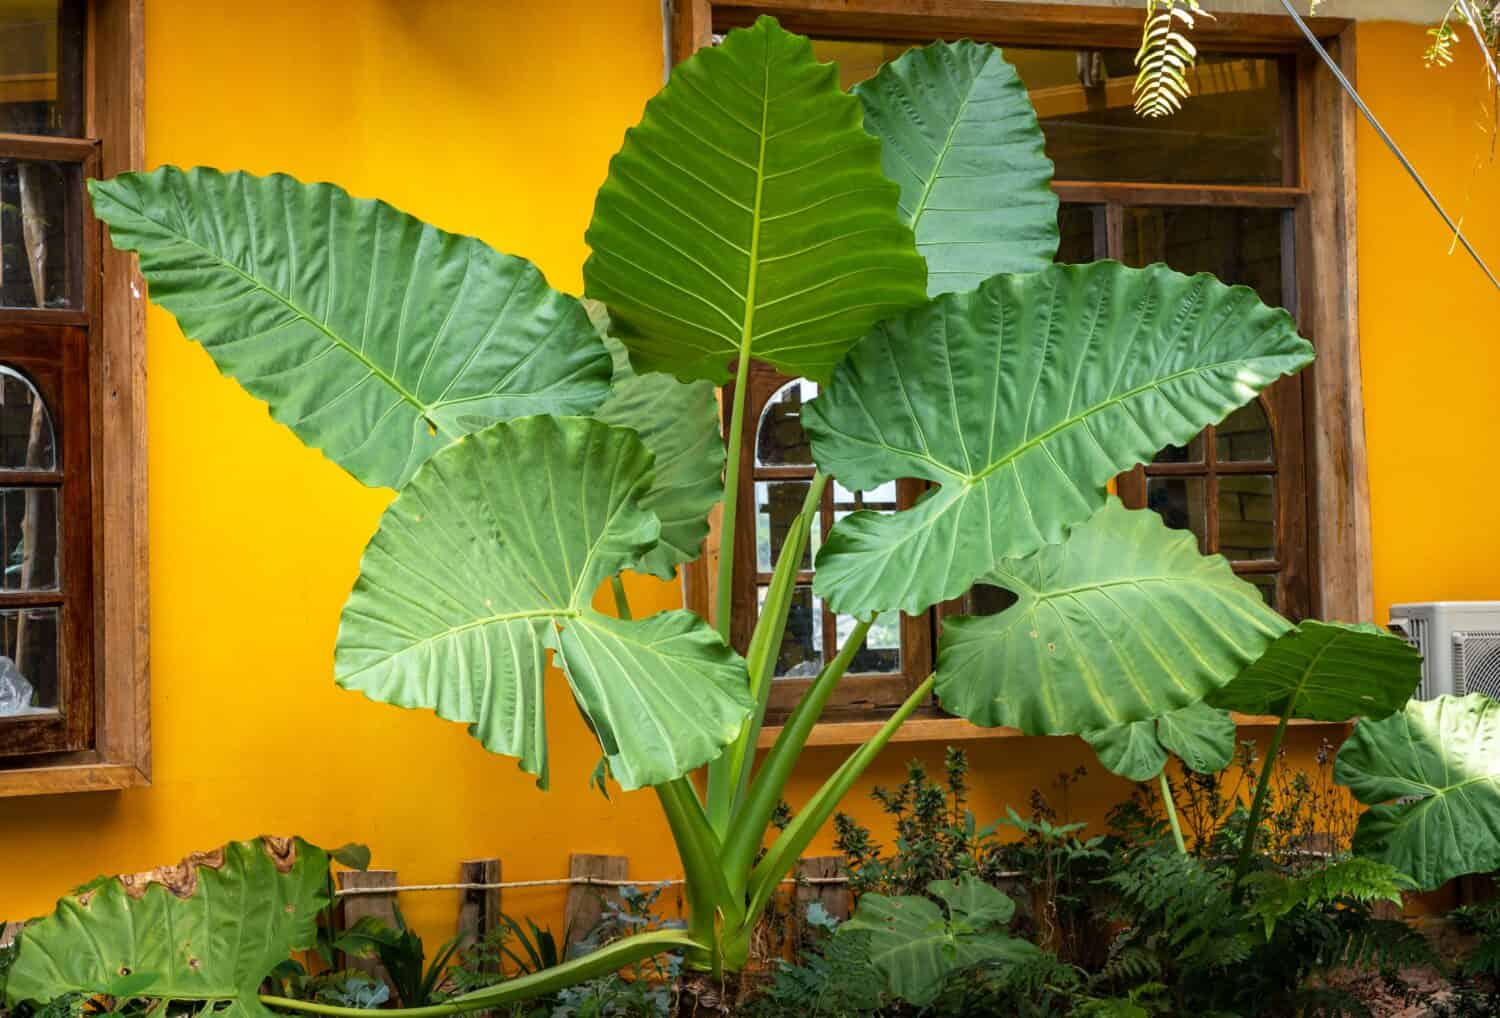 Alocasia Macrorrhiza (or Giant Elephant Ear) plant growth in the garden. This plant is a spectacular tropical landscape plant with giant leaves the look like elephant ears.